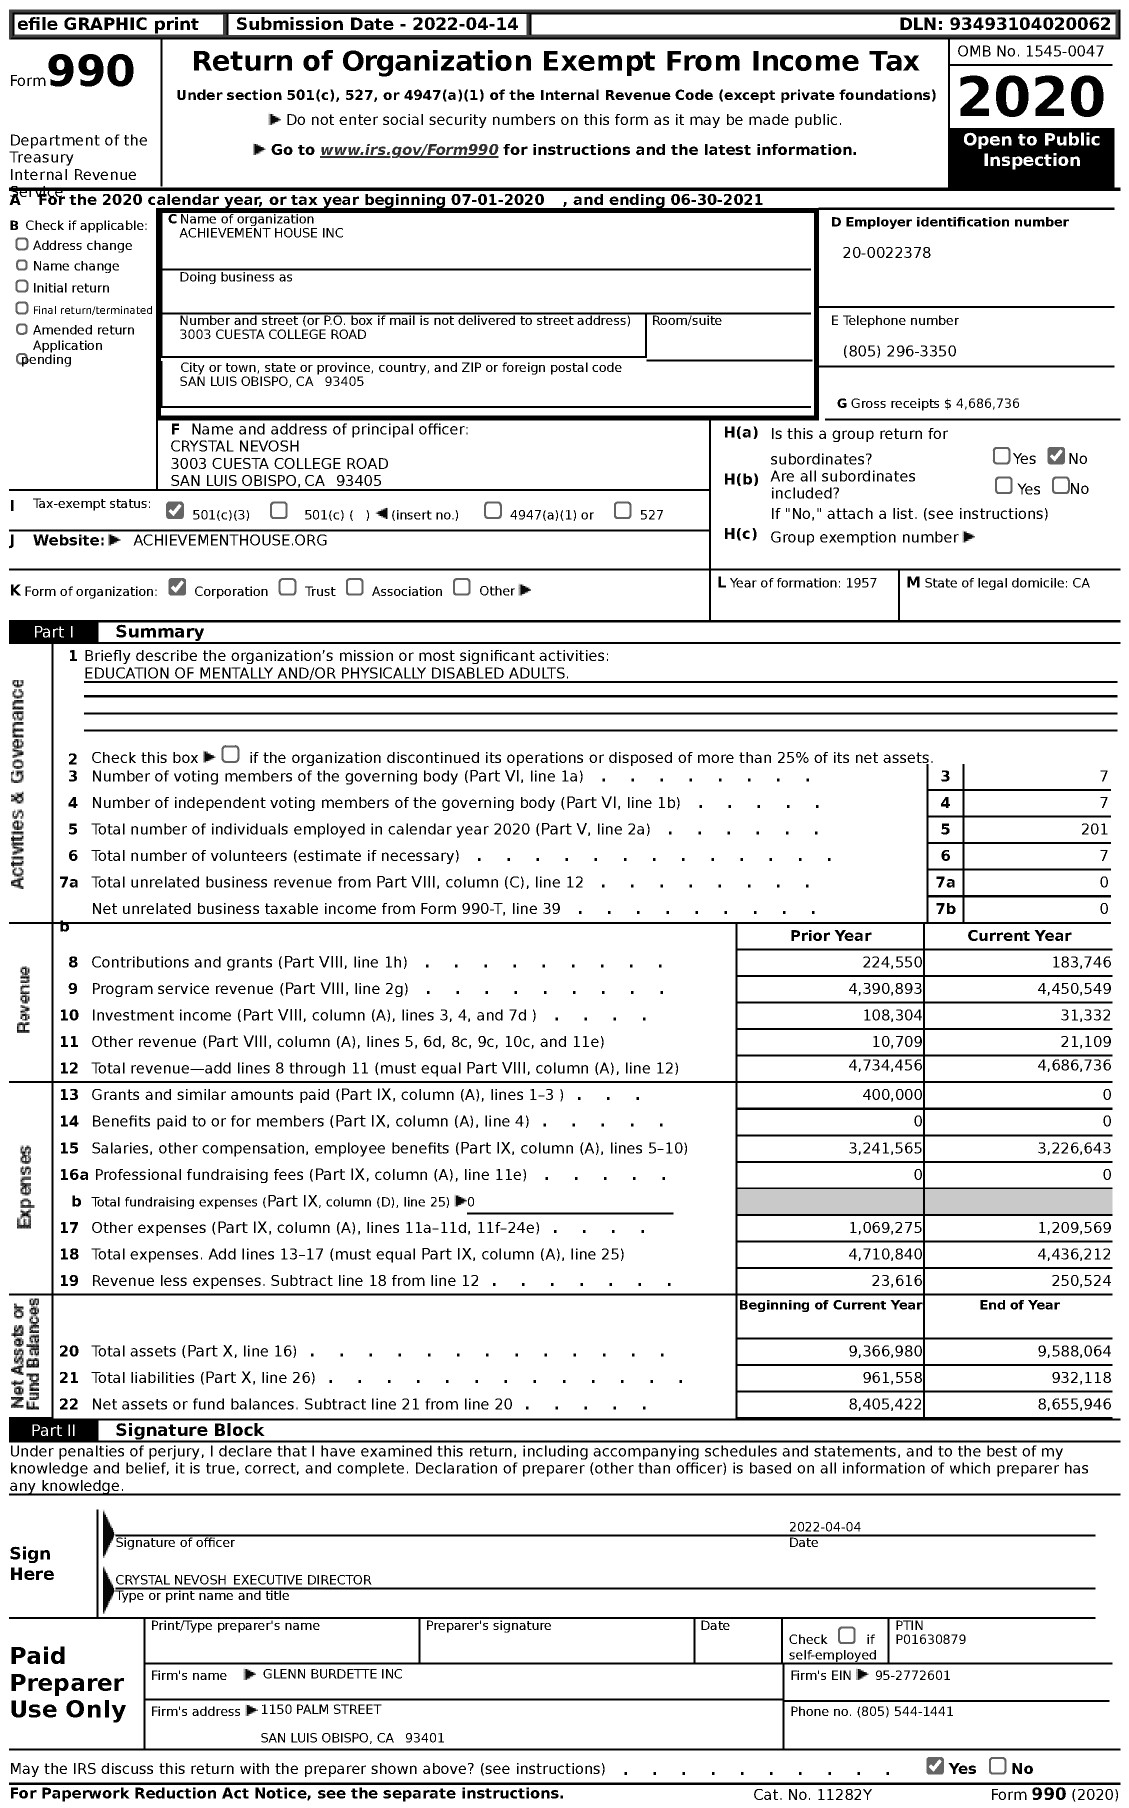 Image of first page of 2020 Form 990 for Achievement House Incorporated (AHI)